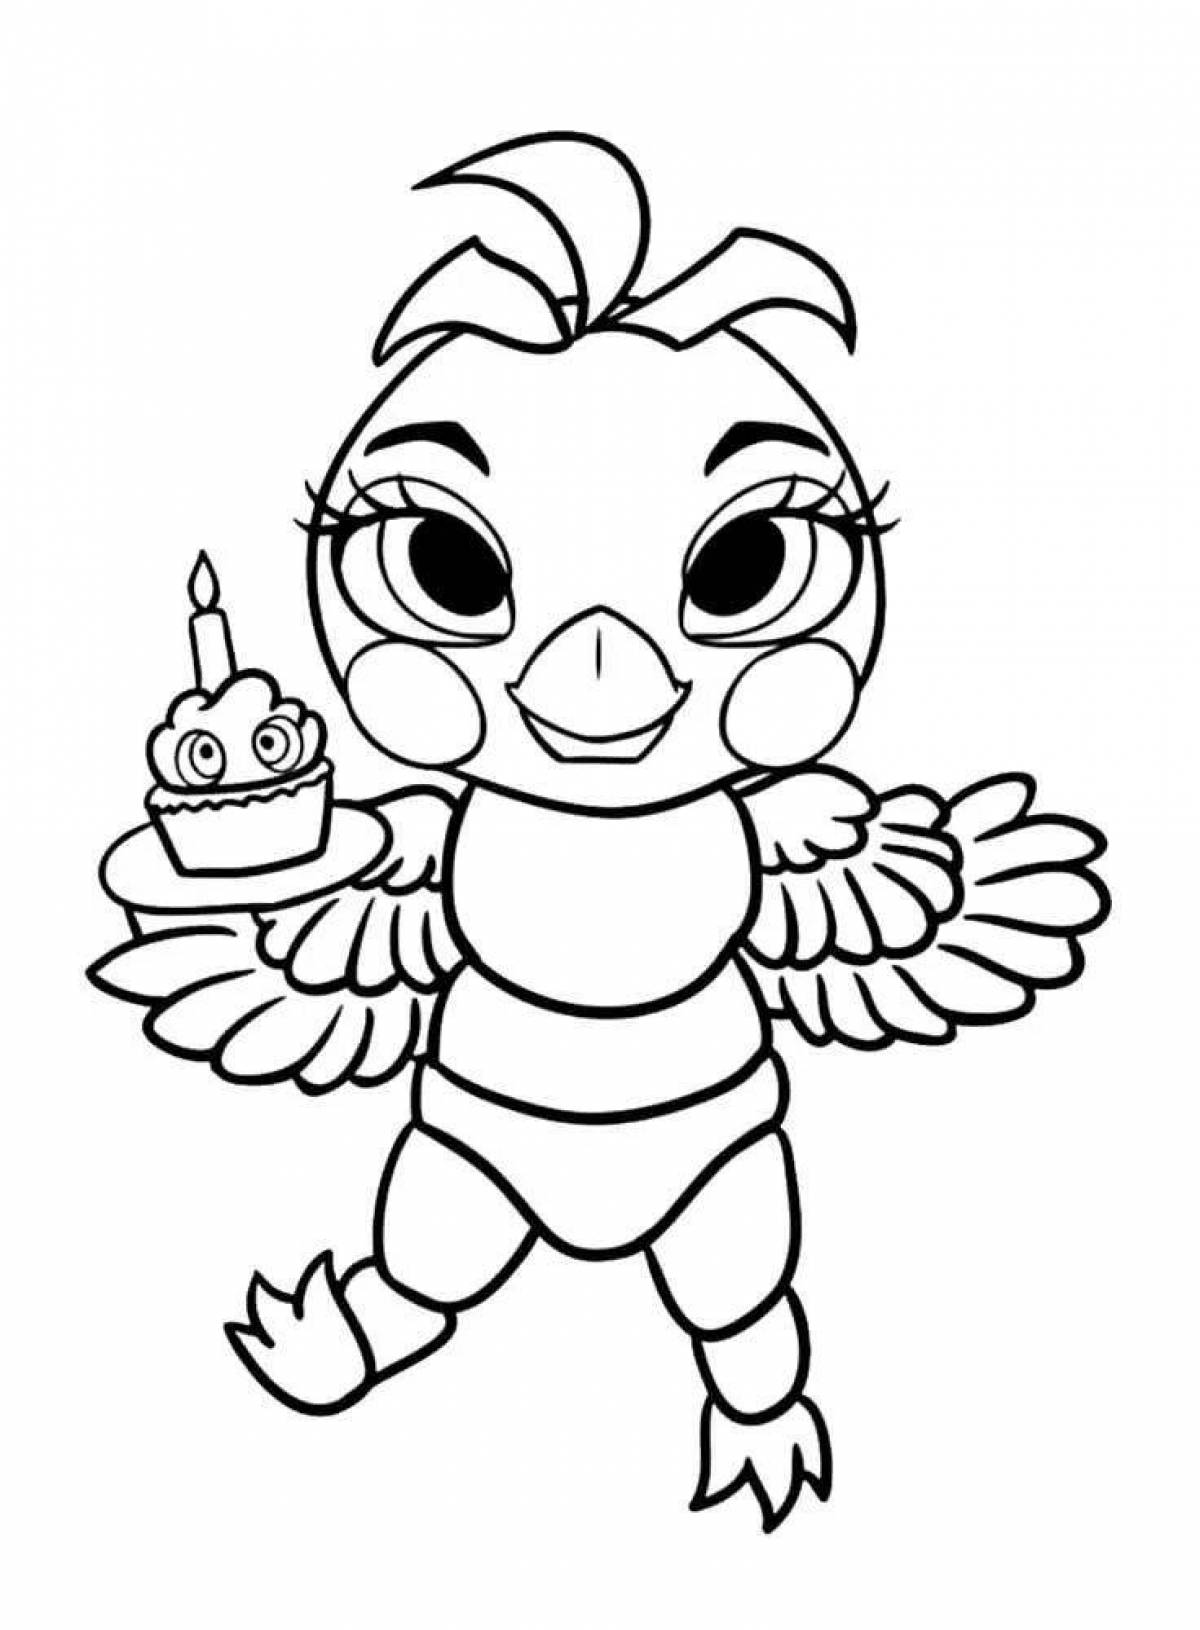 Toy chick's colorful coloring page